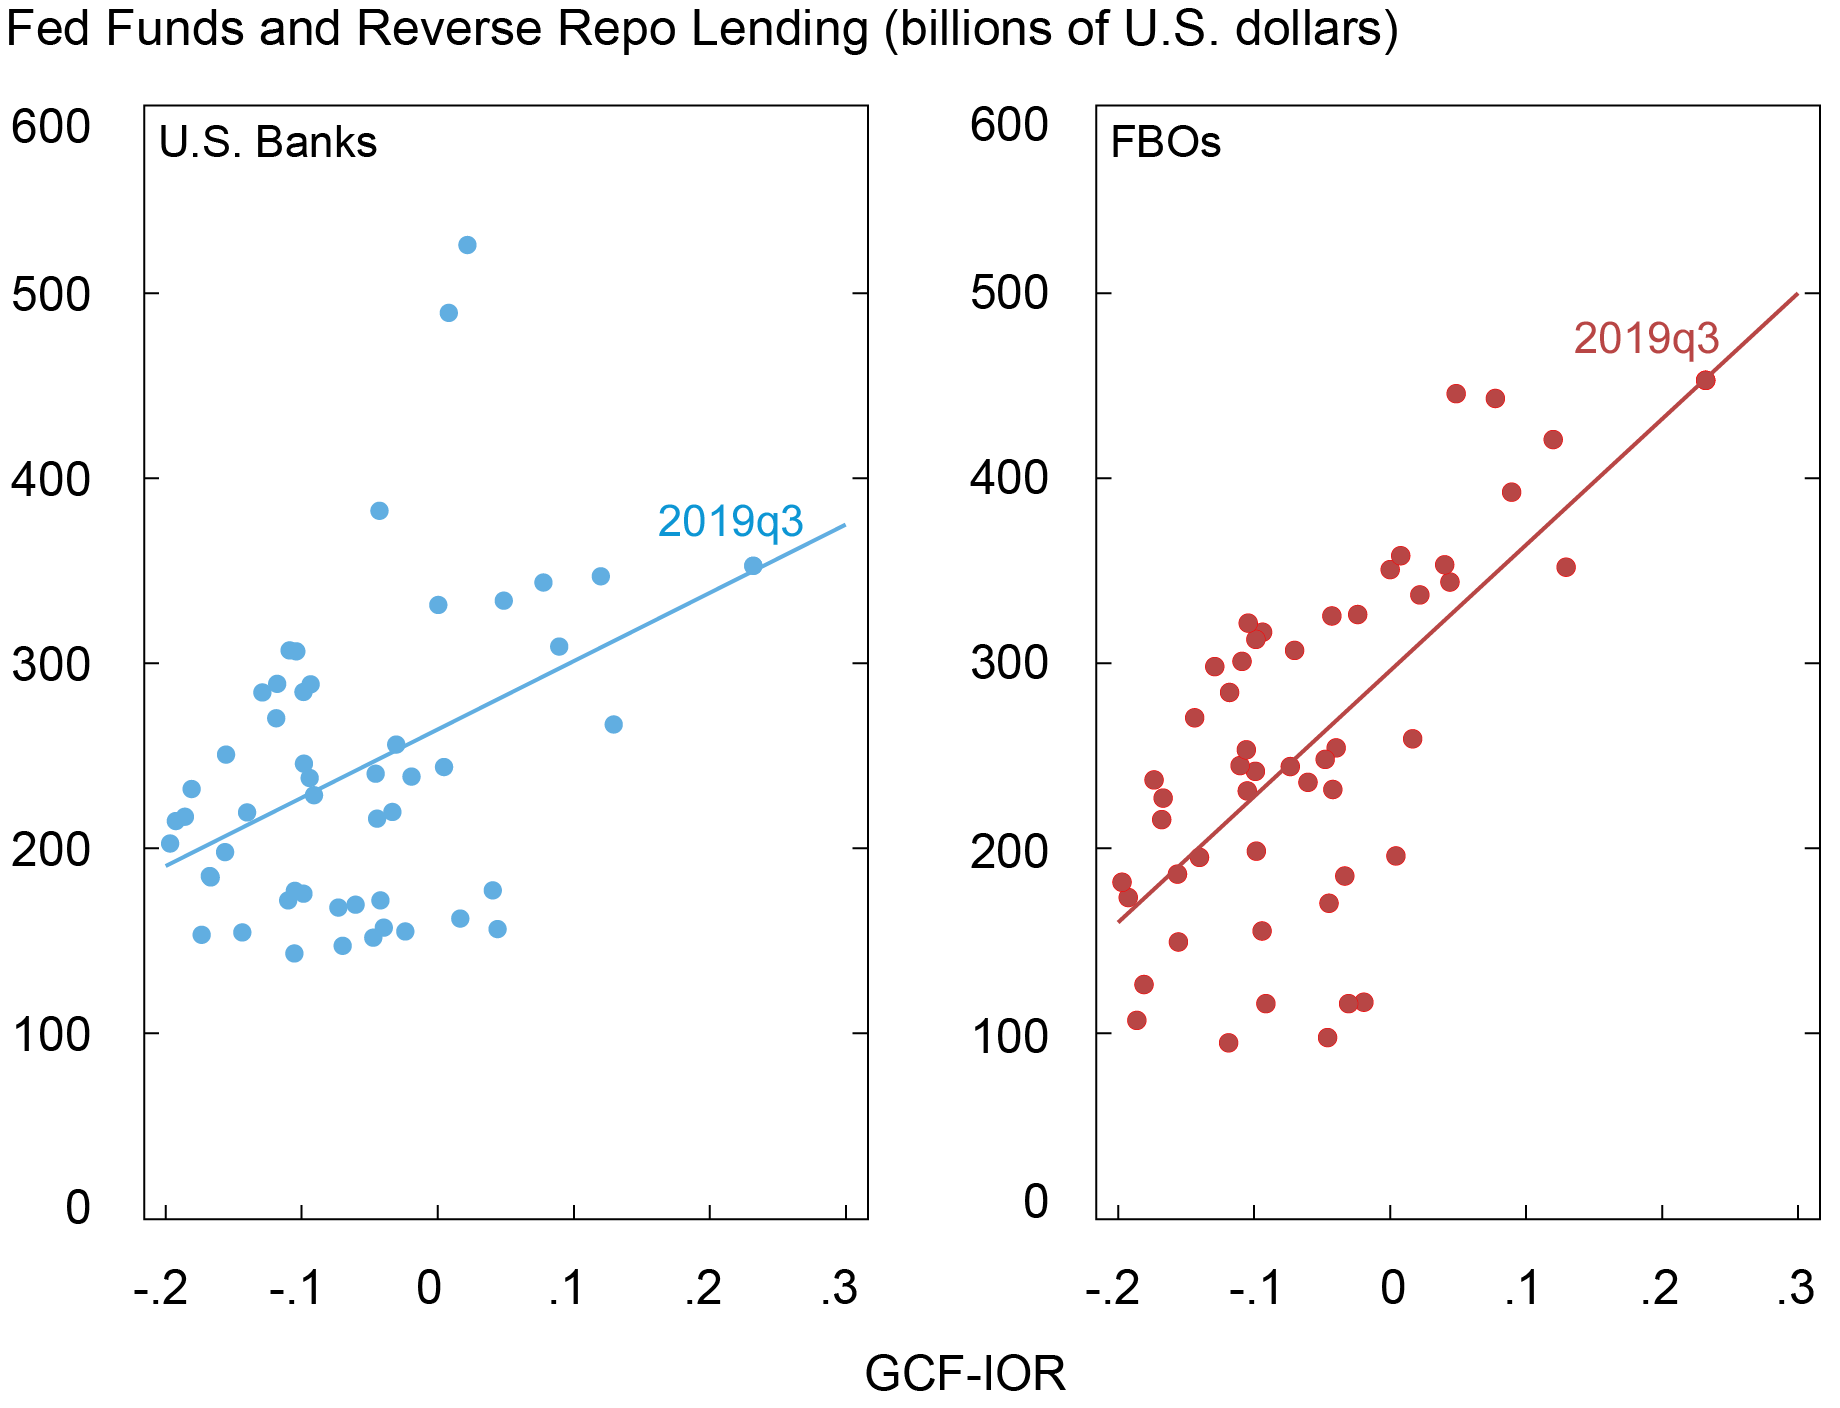 Liberty Street Economics two-panel chart showing that banks’ repo lending activities increase as the GCF-IOR spread widens, with the relationship being steeper for foreign bank organizations than for U.S. banks.